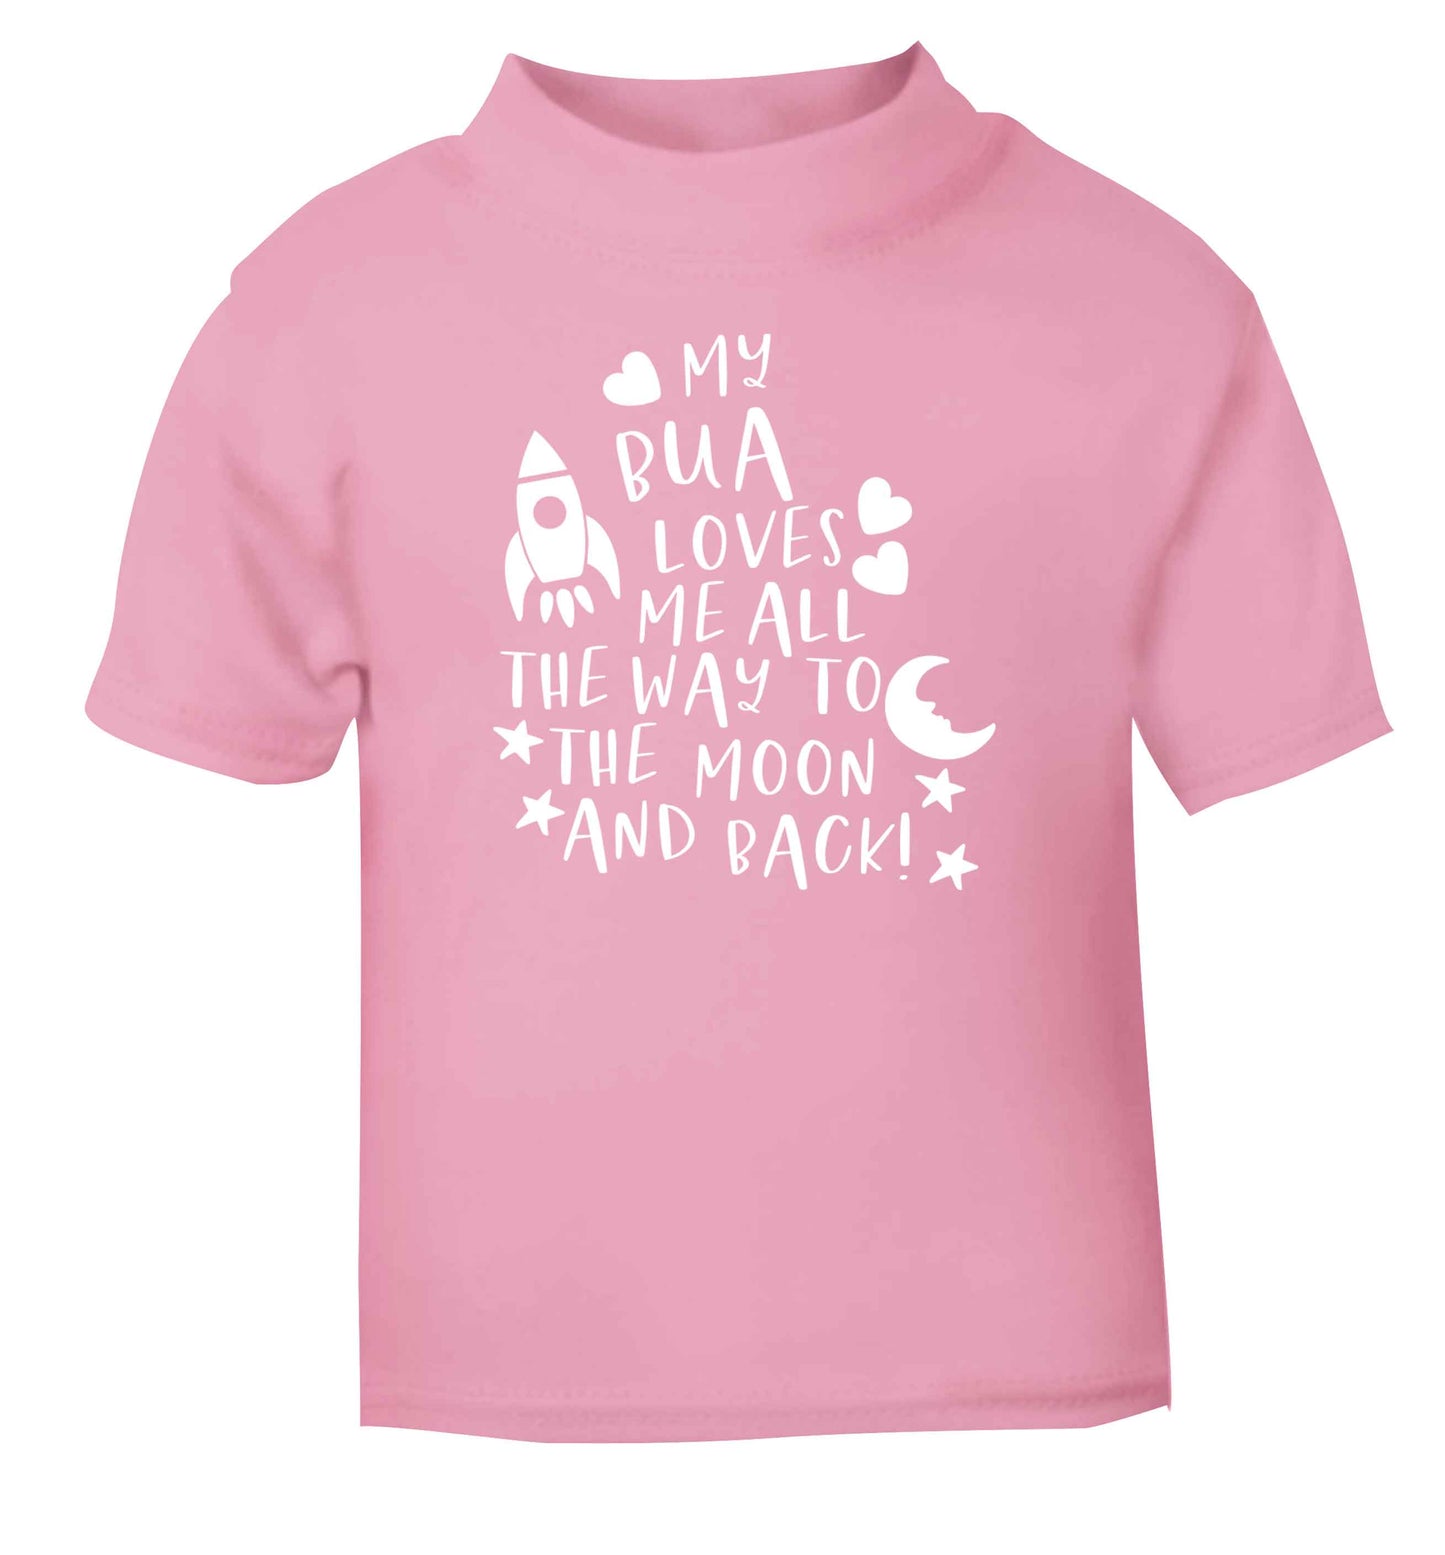 My bua loves me all they way to the moon and back light pink Baby Toddler Tshirt 2 Years